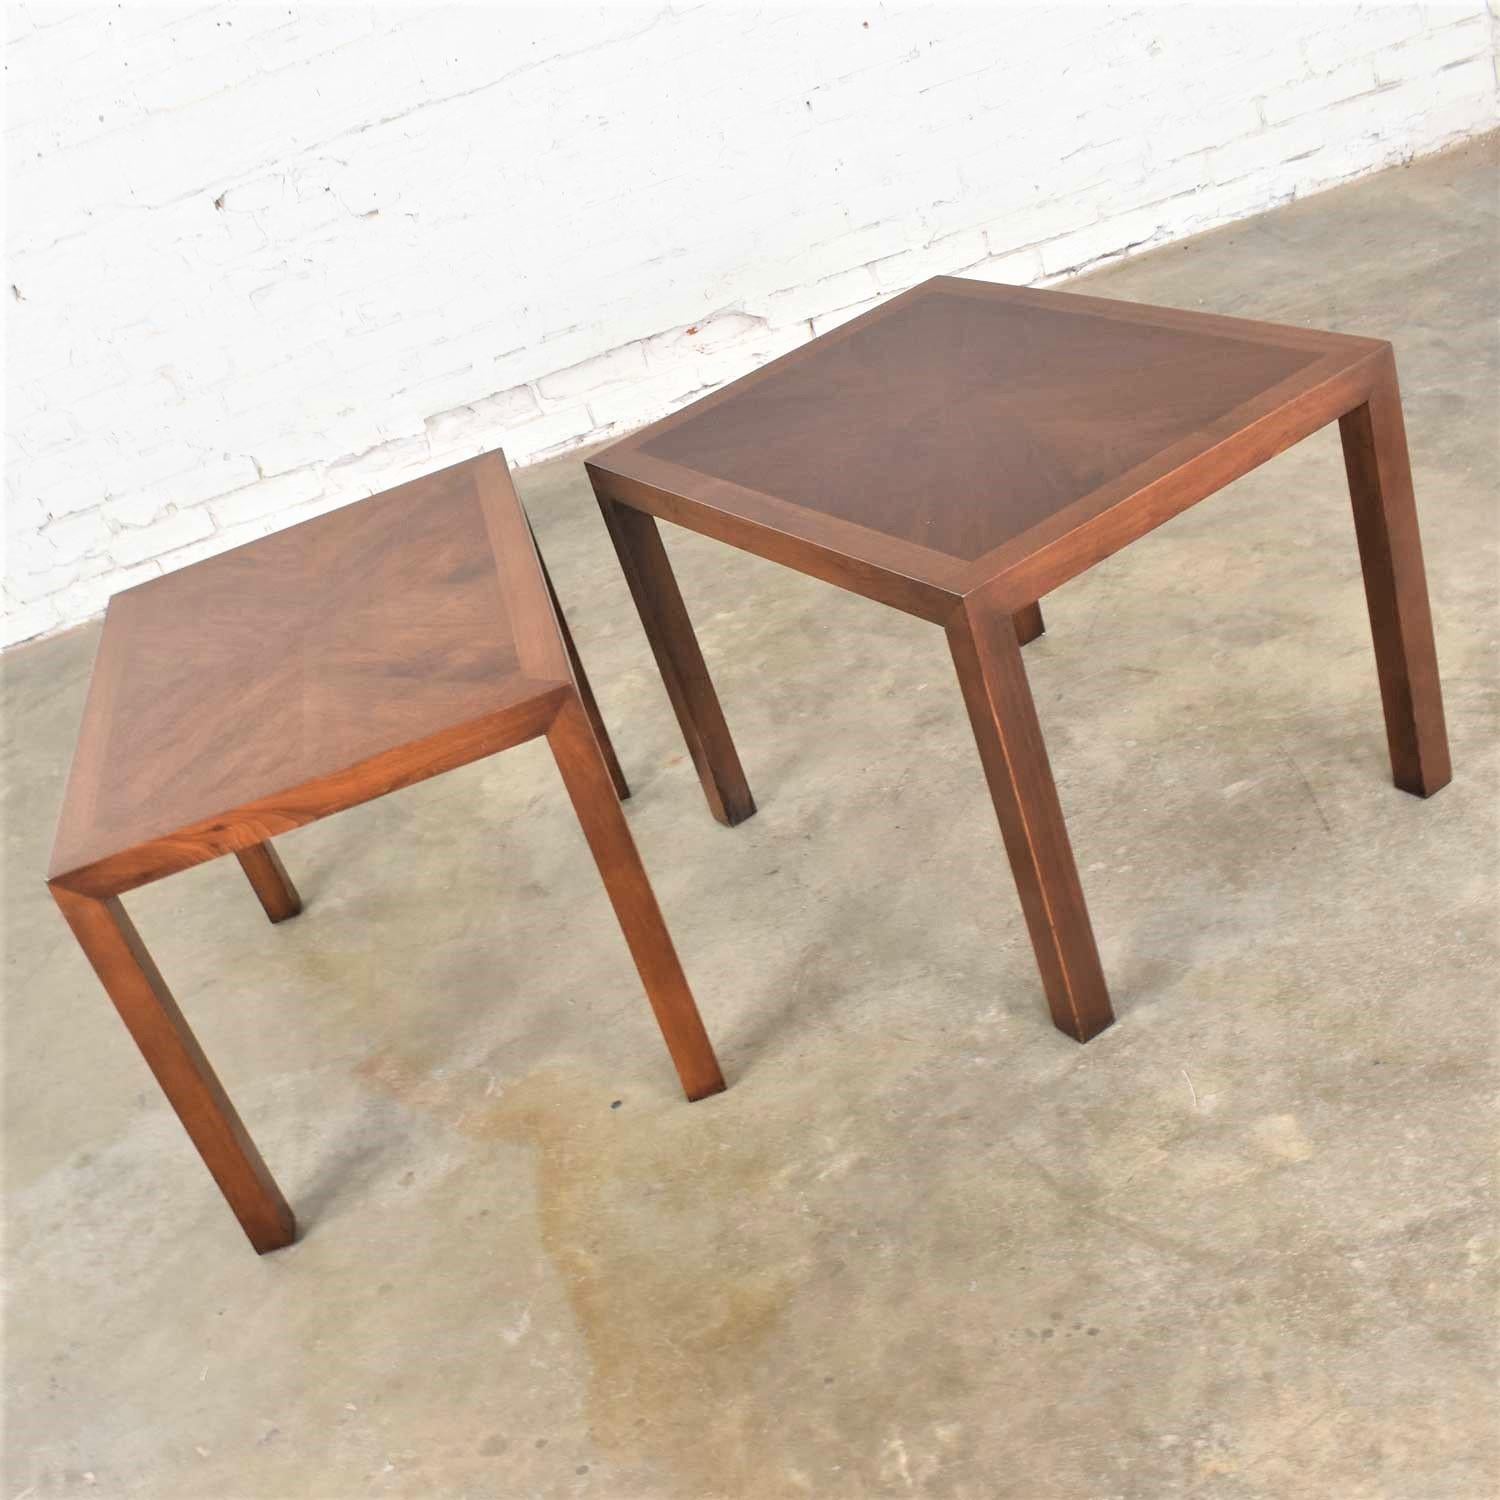 Late 20th Century Vintage Modern Lane Parsons Style #1124-5 Walnut End or Side Tables, 1970, Pair